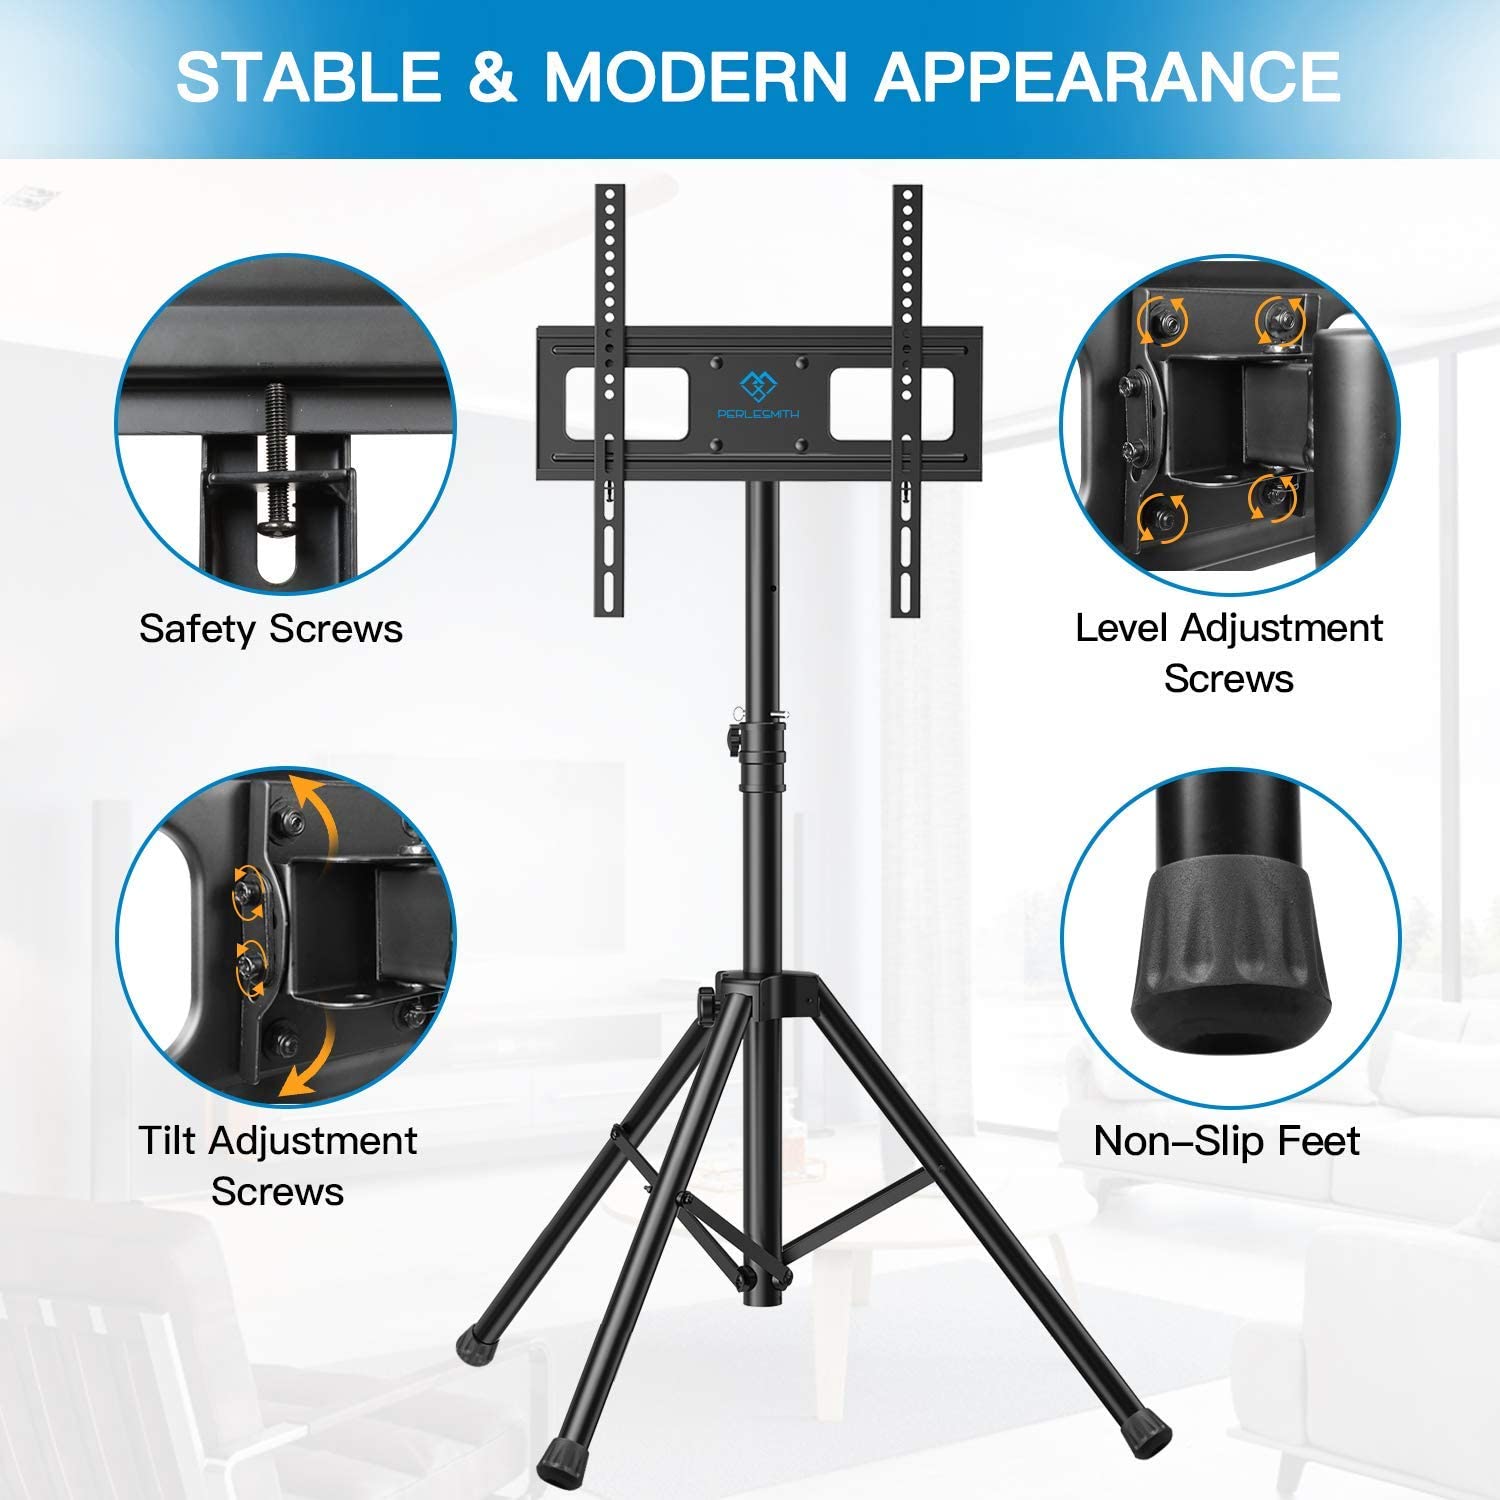 Portable Tripod TV Stand For 23